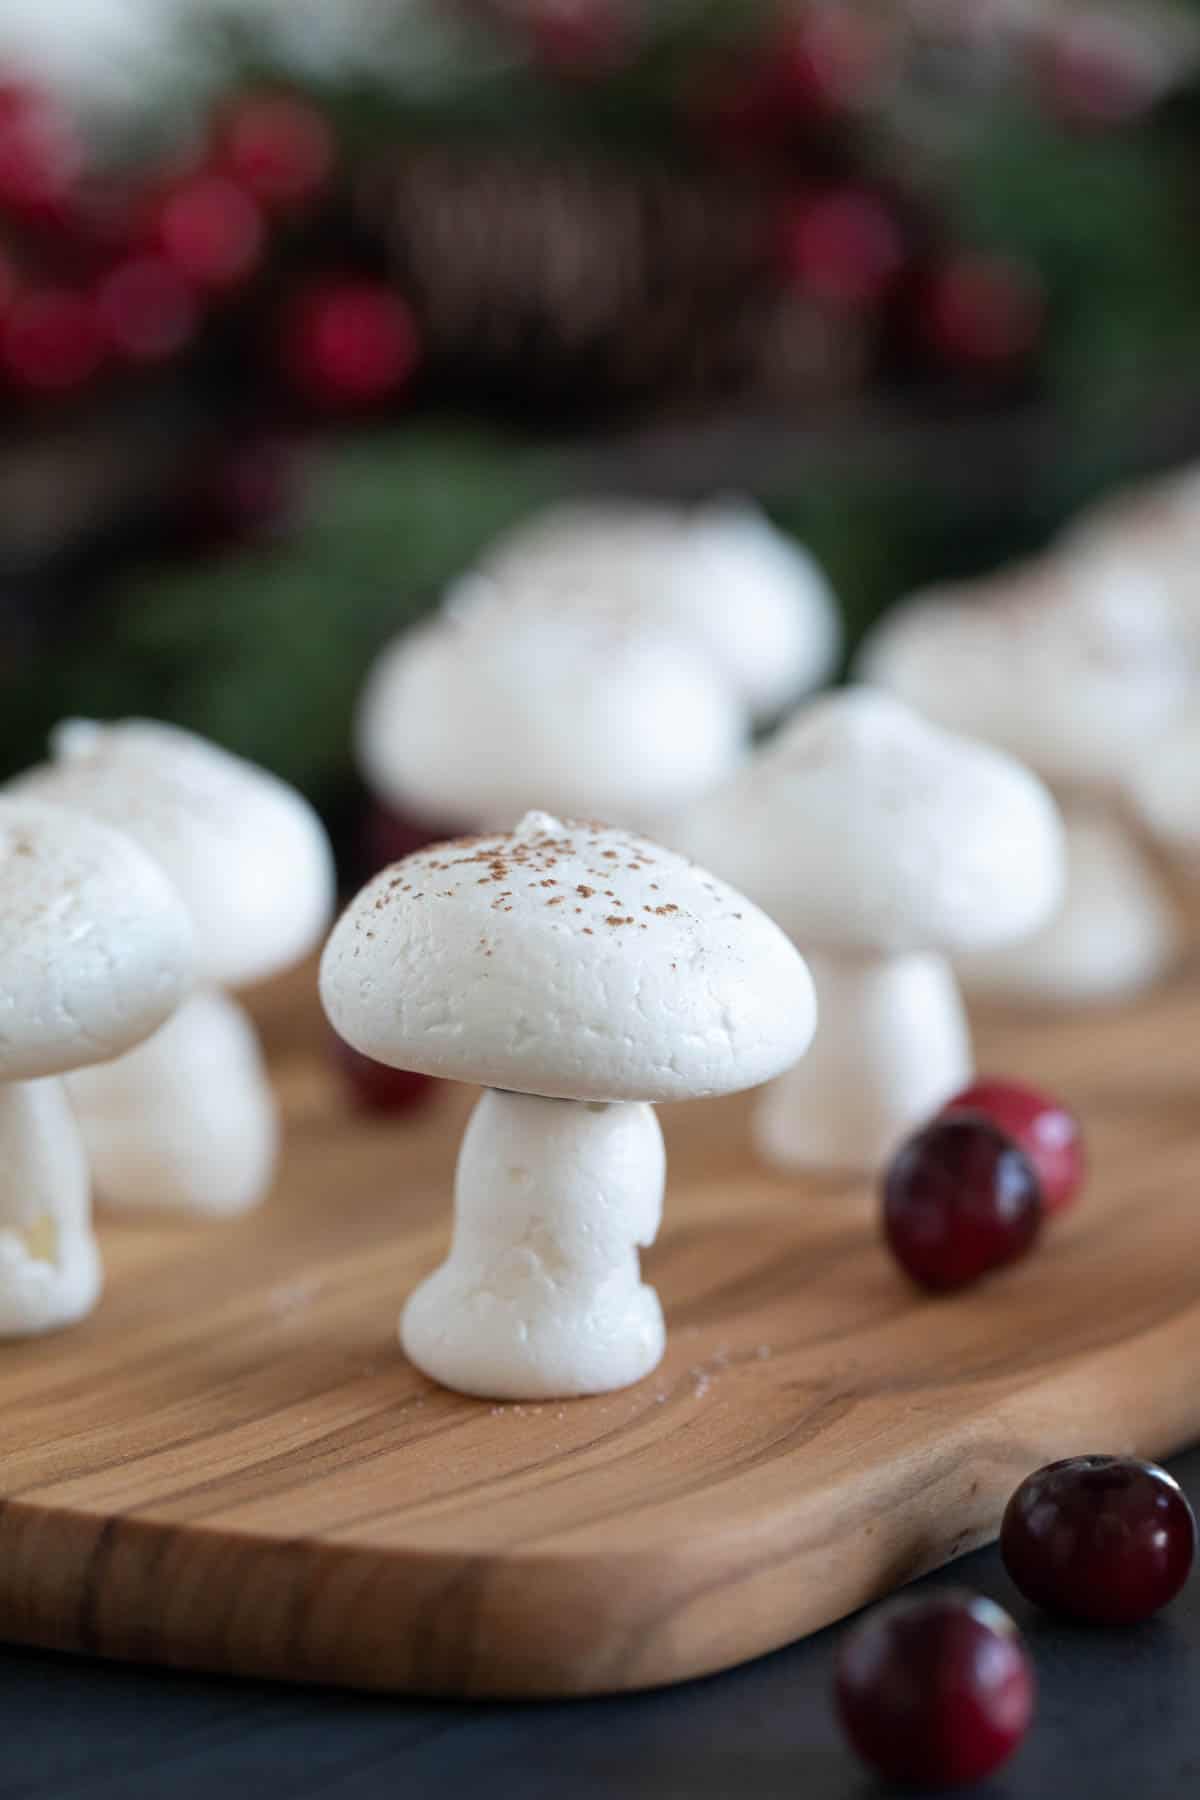 Meringue mushrooms topped with cocoa powder.